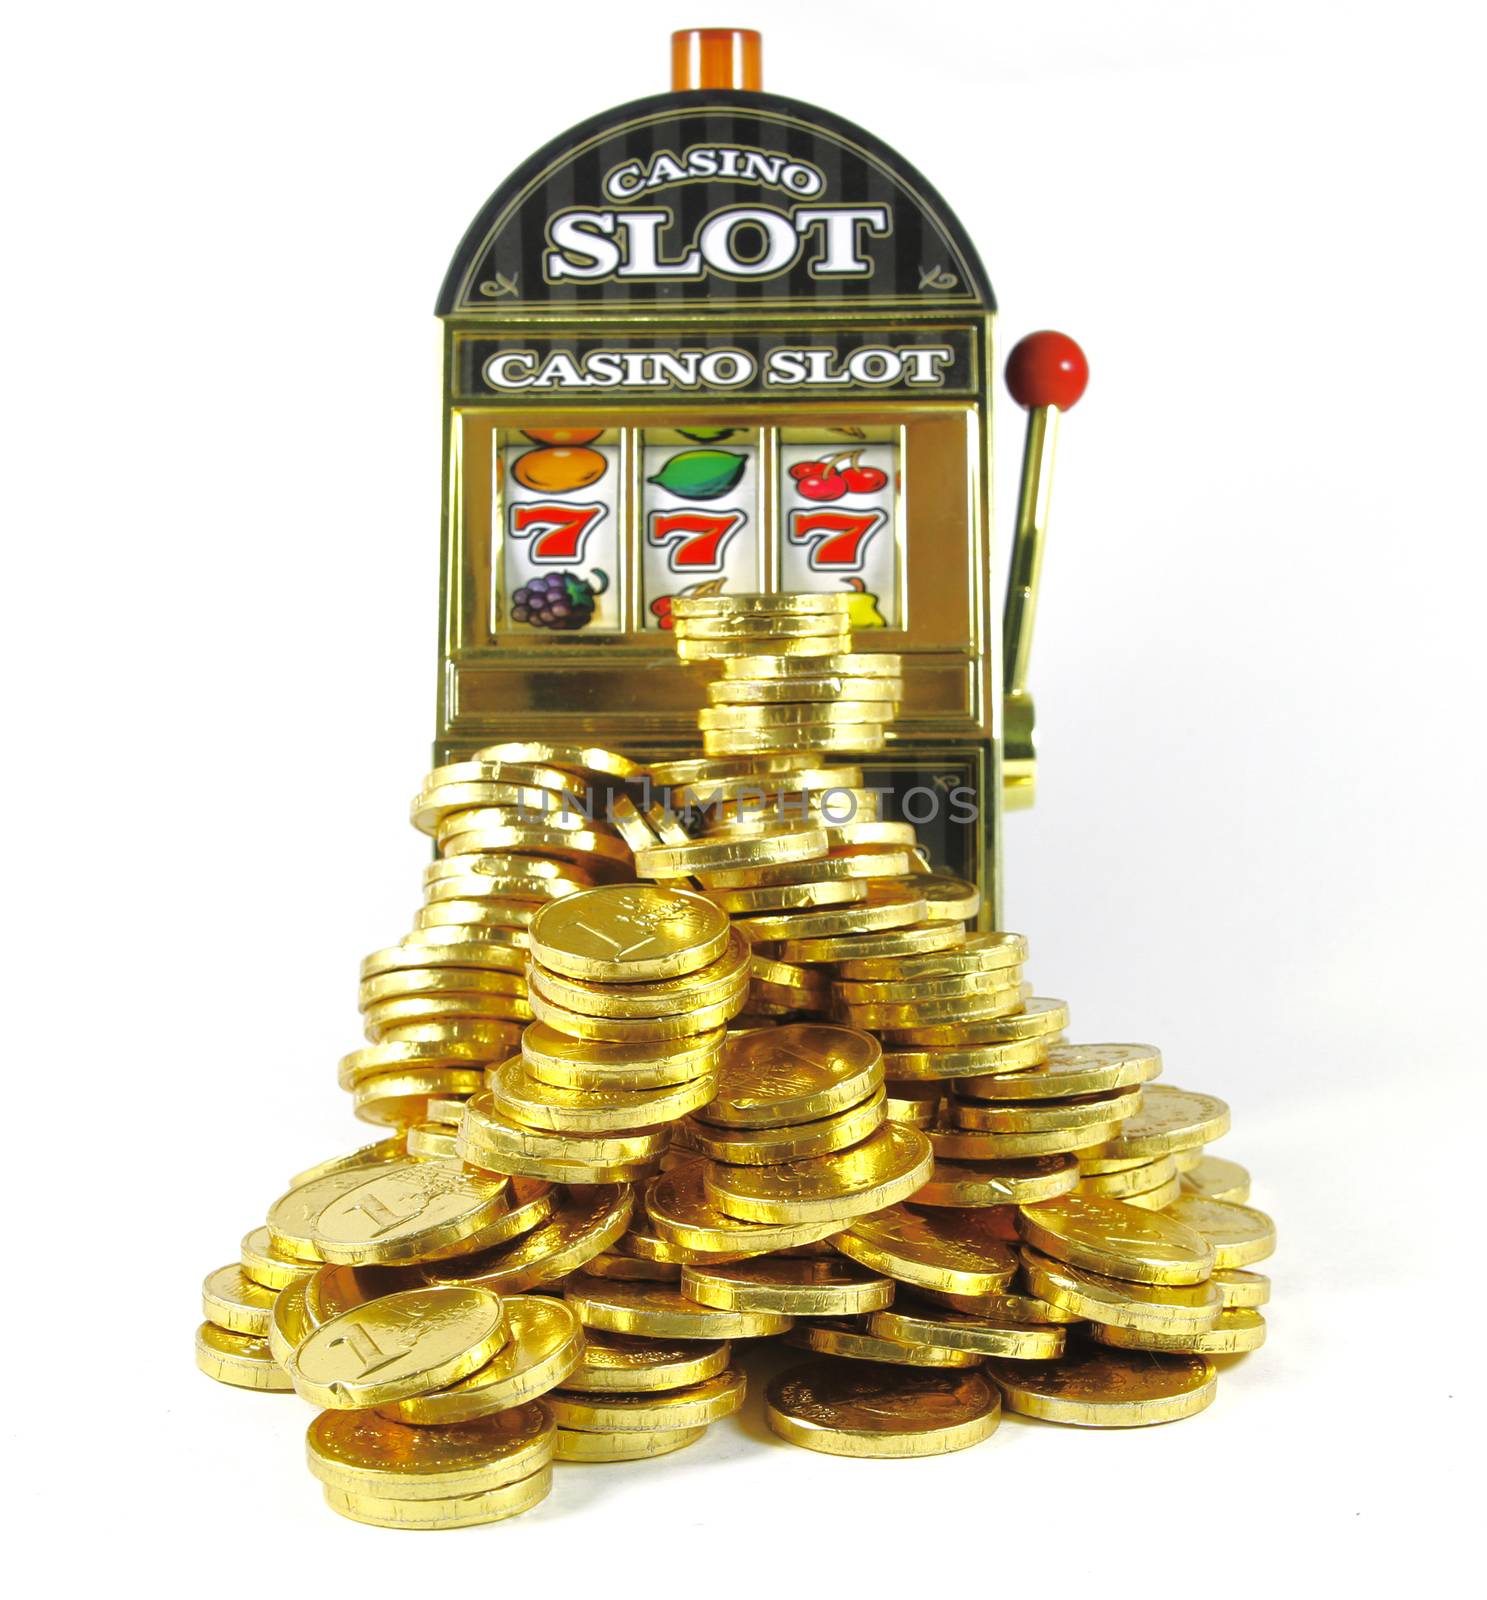 retro slot machine with 777 and lots of gold by davincidig